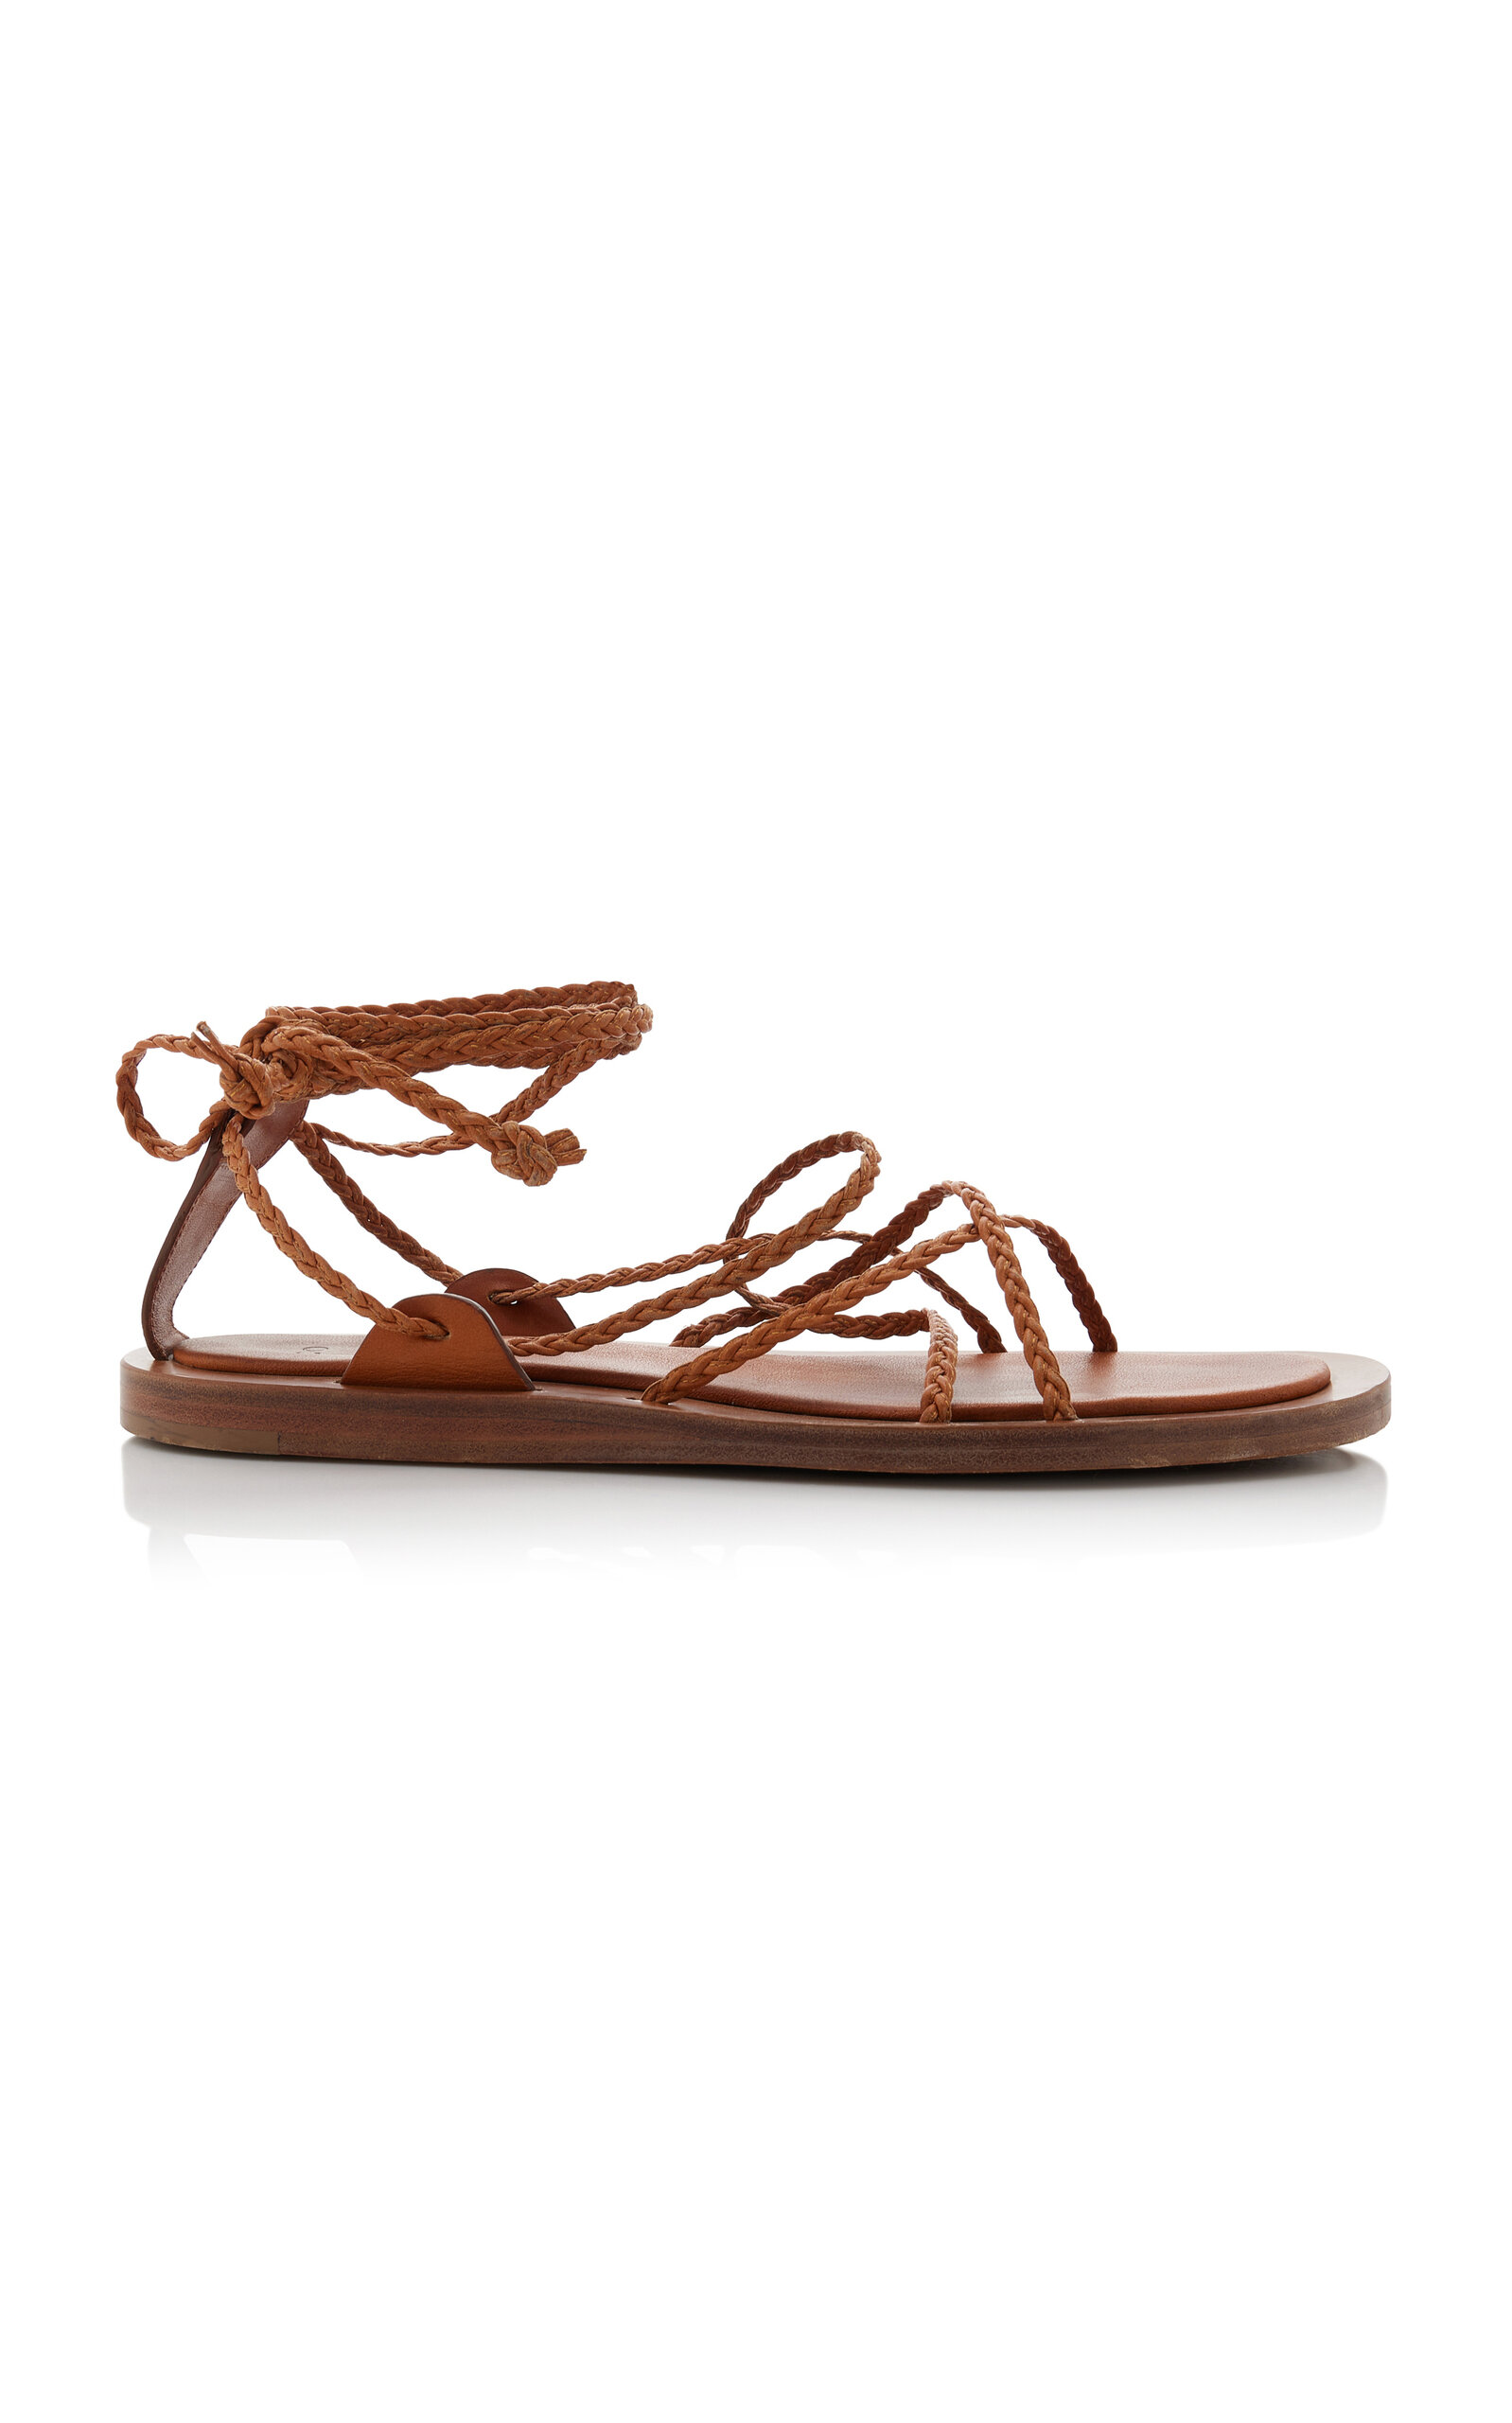 Co Braided Leather Gladiator Sandals In Brown